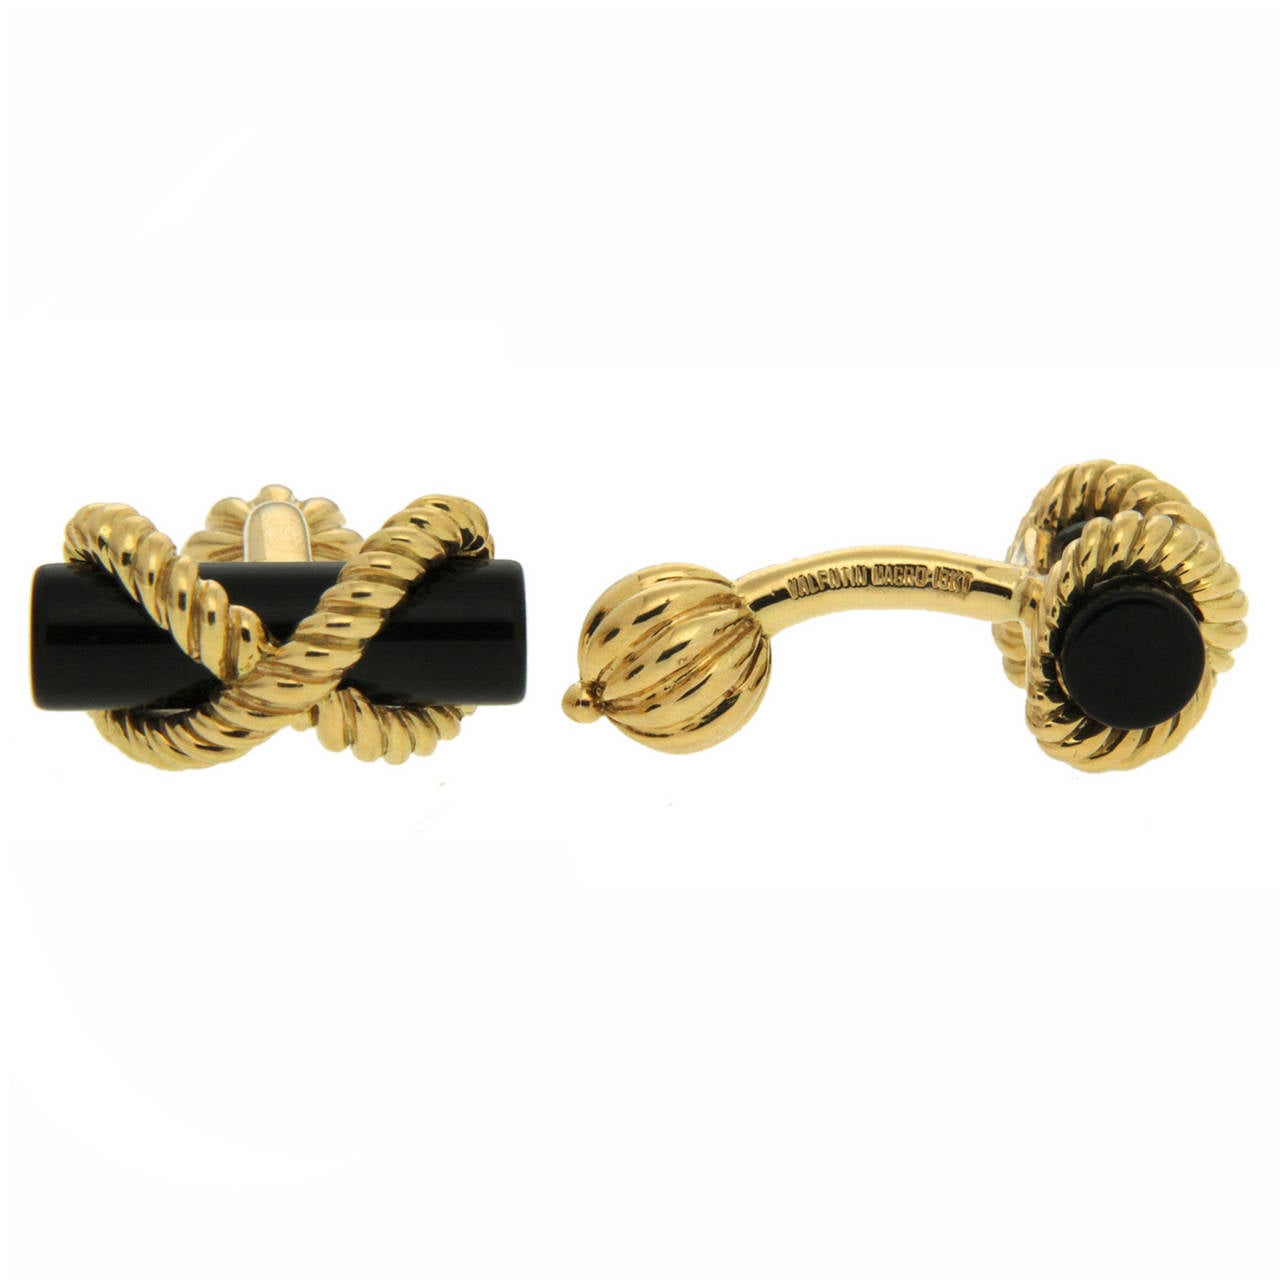 Black Onyx Cufflinks with Twisted Gold Wires